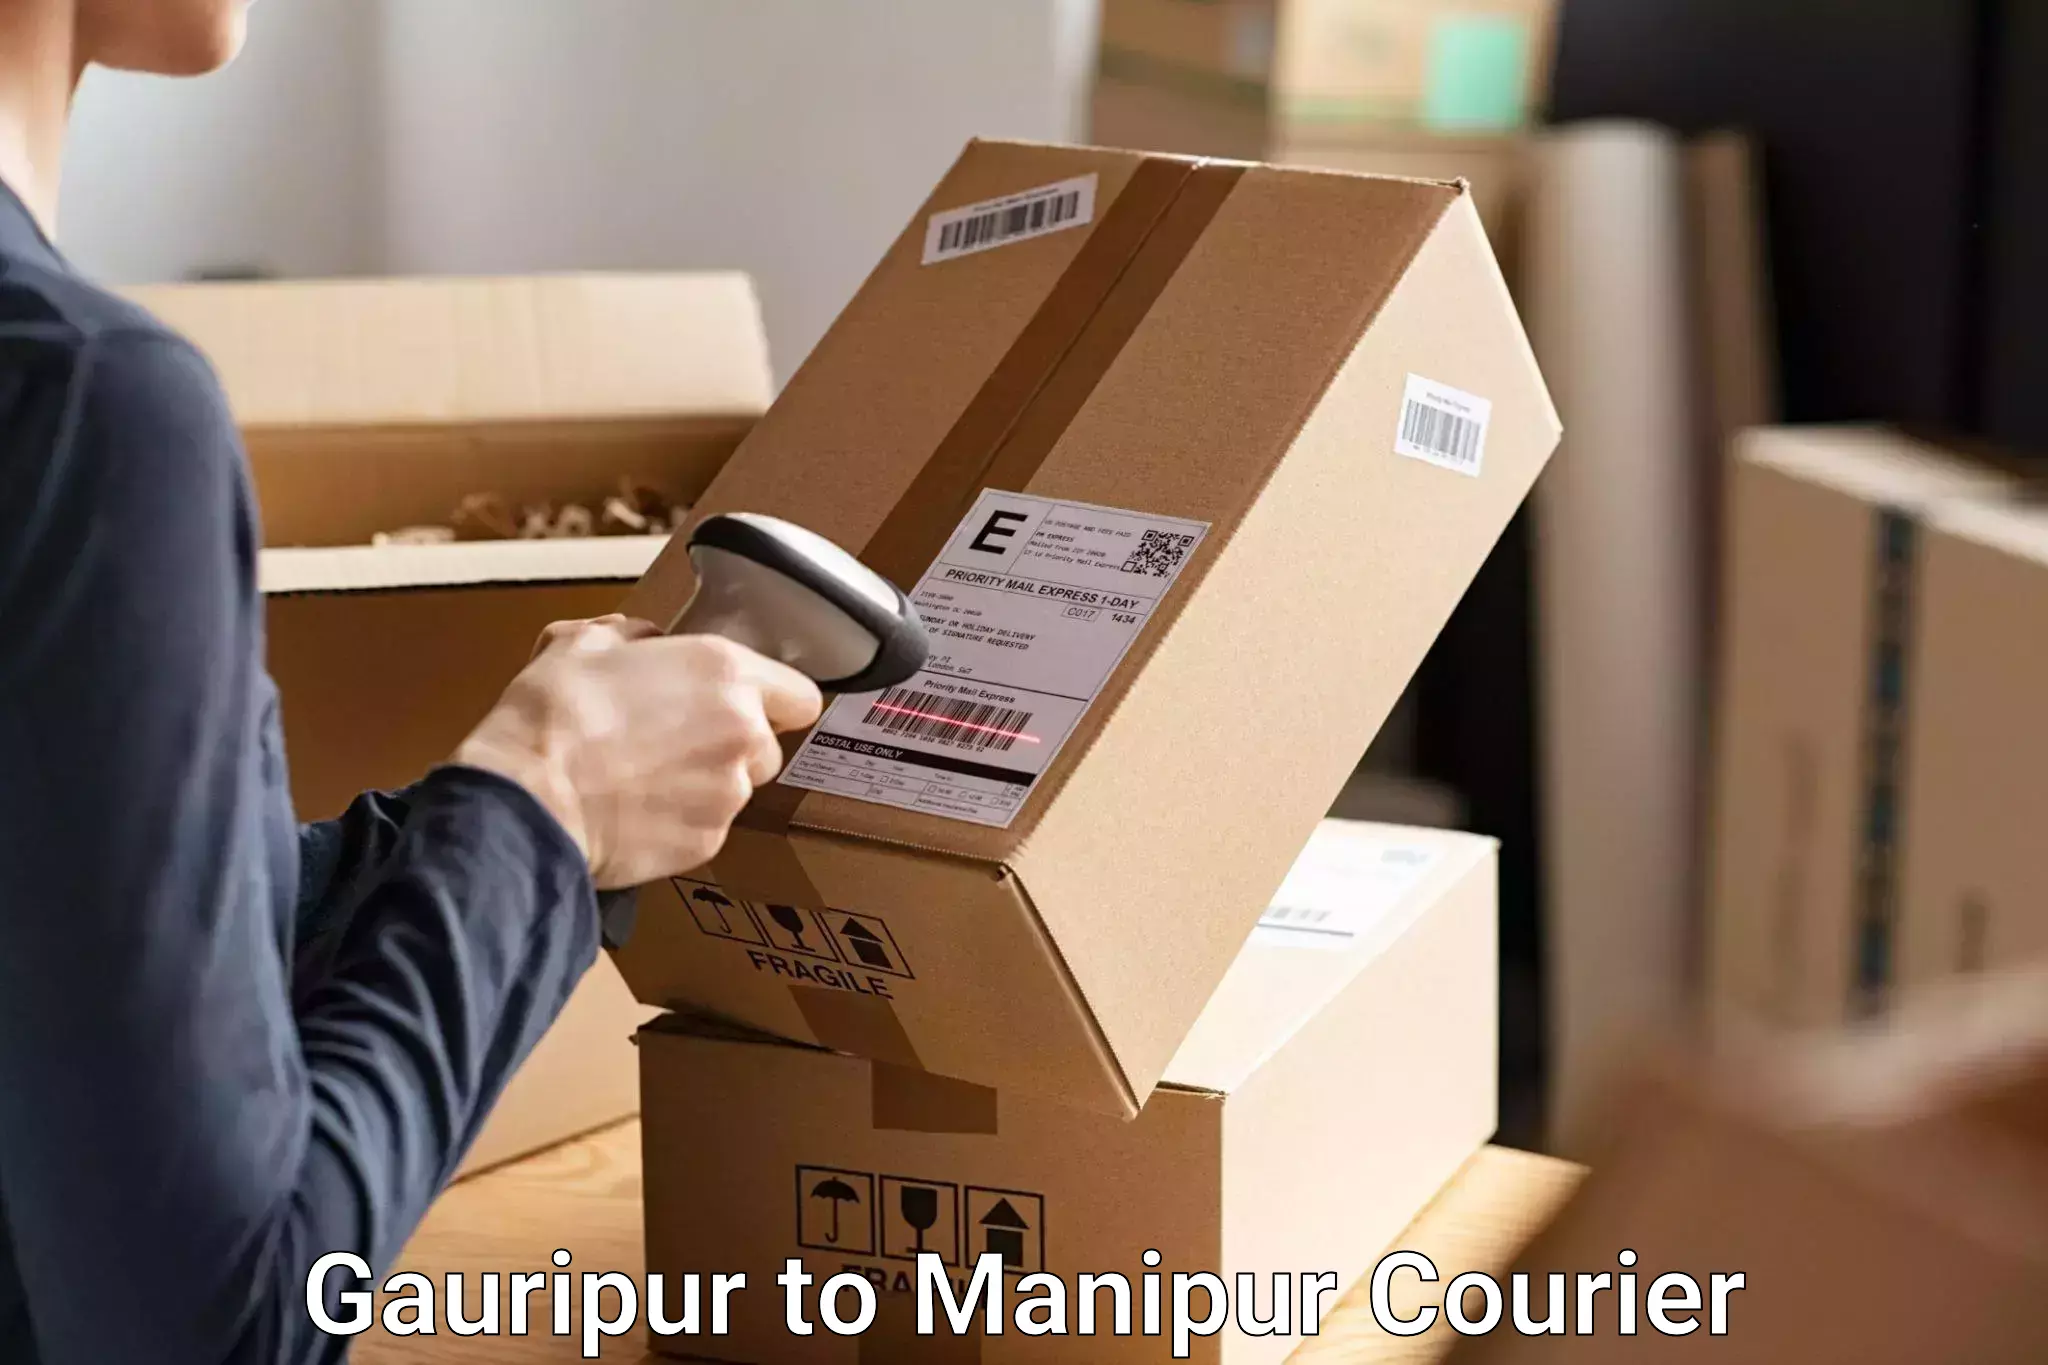 Luggage transport company Gauripur to Manipur